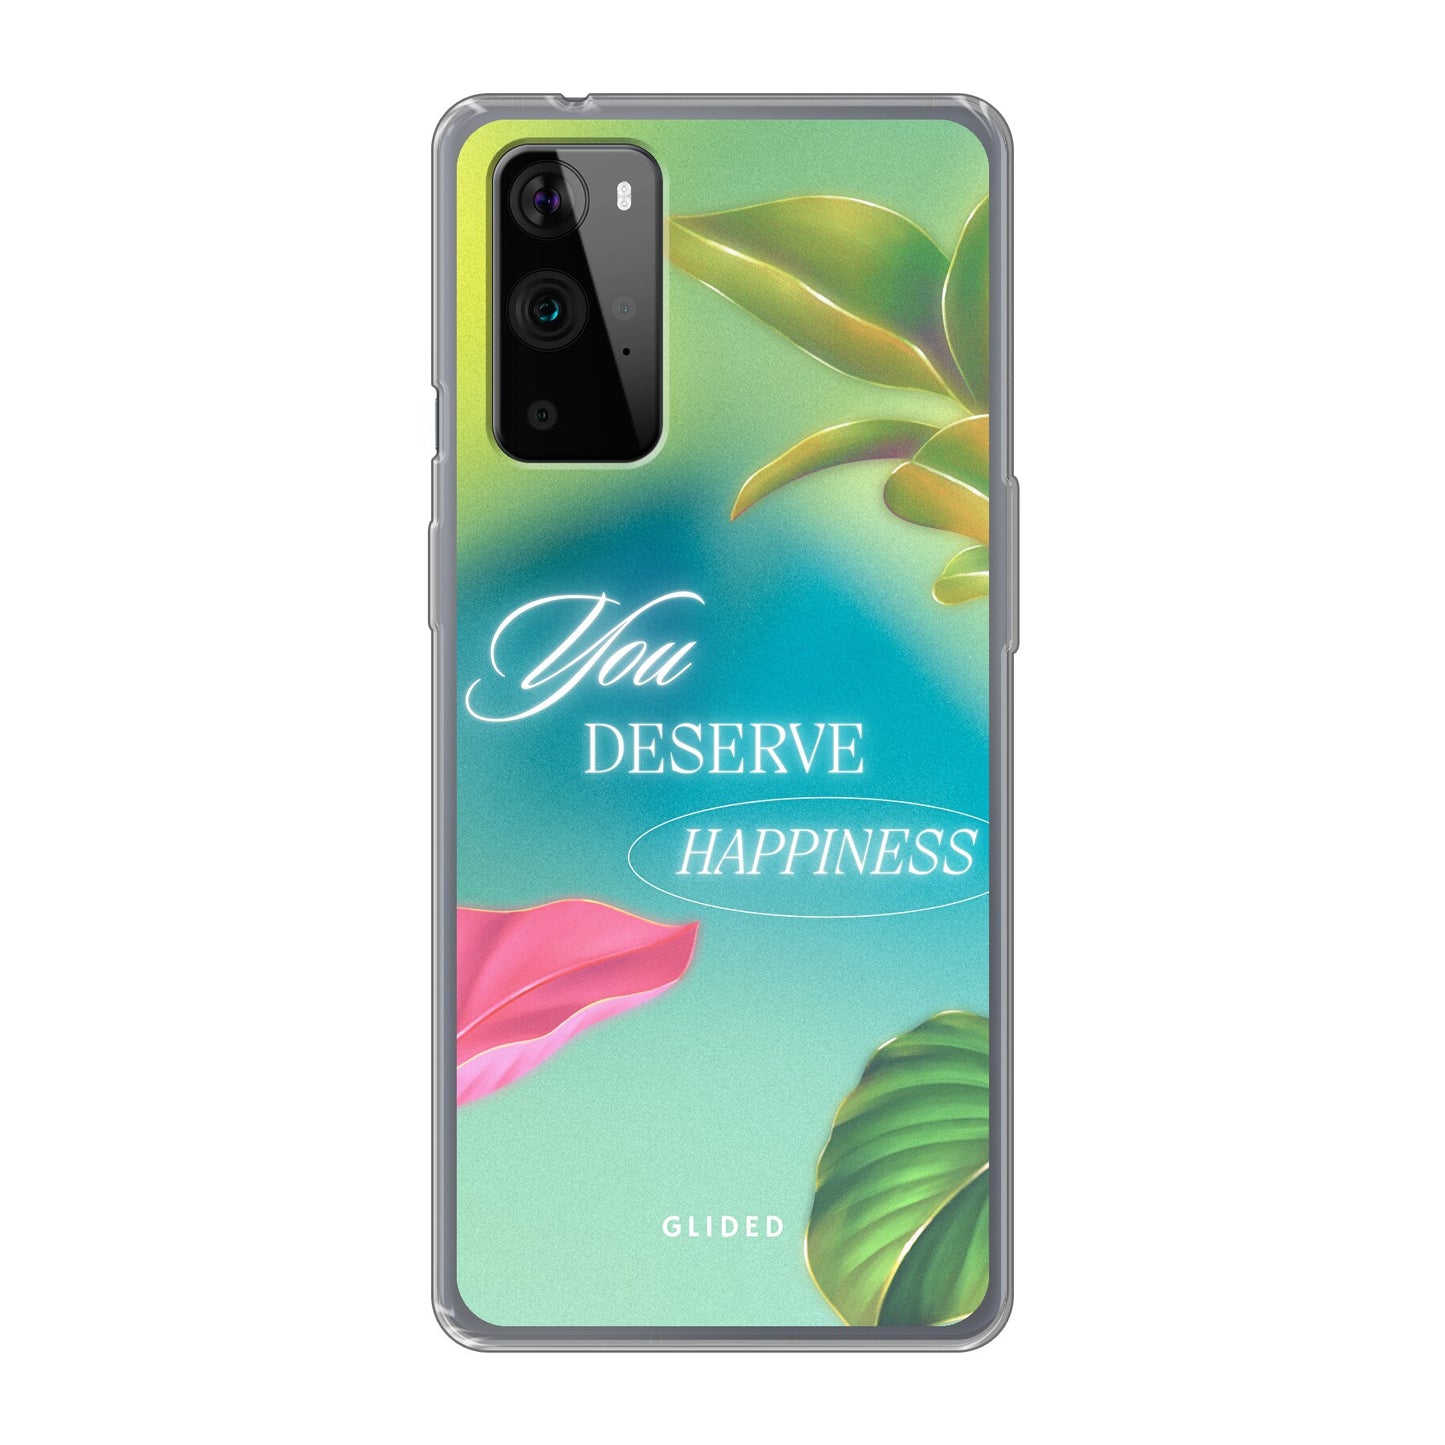 Happiness - OnePlus 9 Pro - Soft case